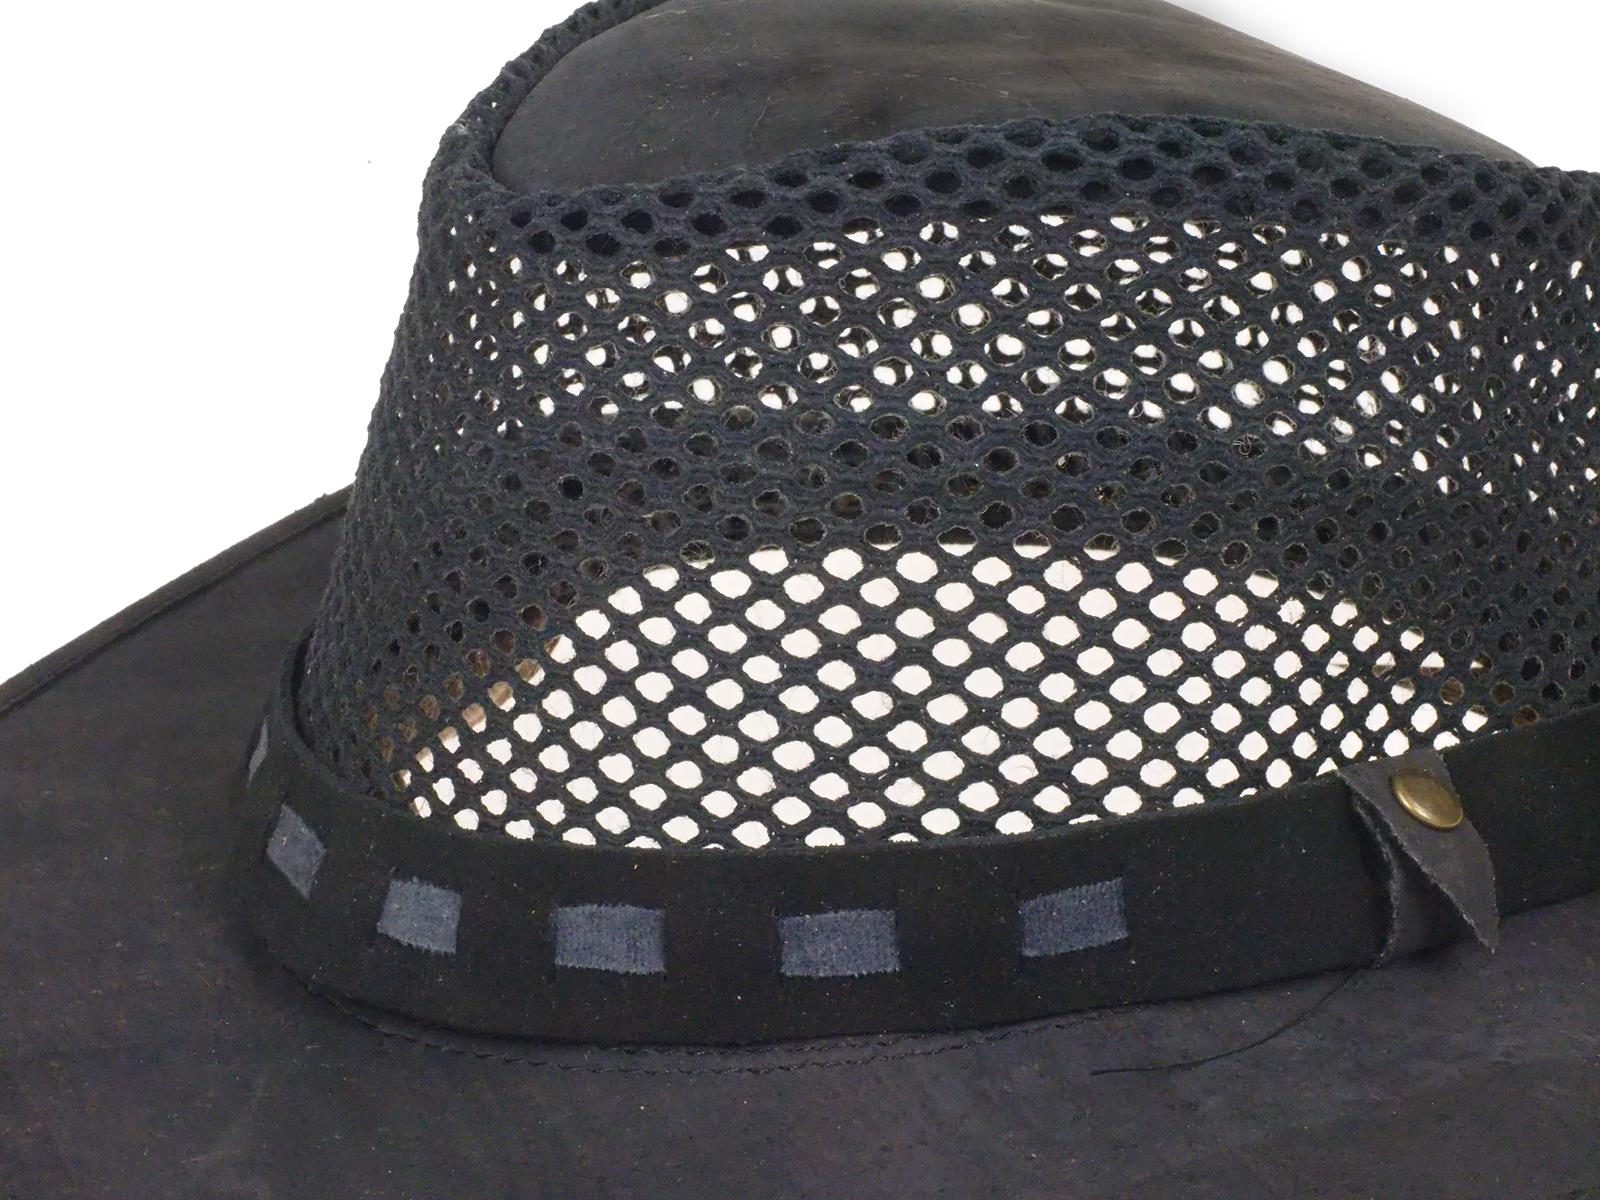 hat with mesh